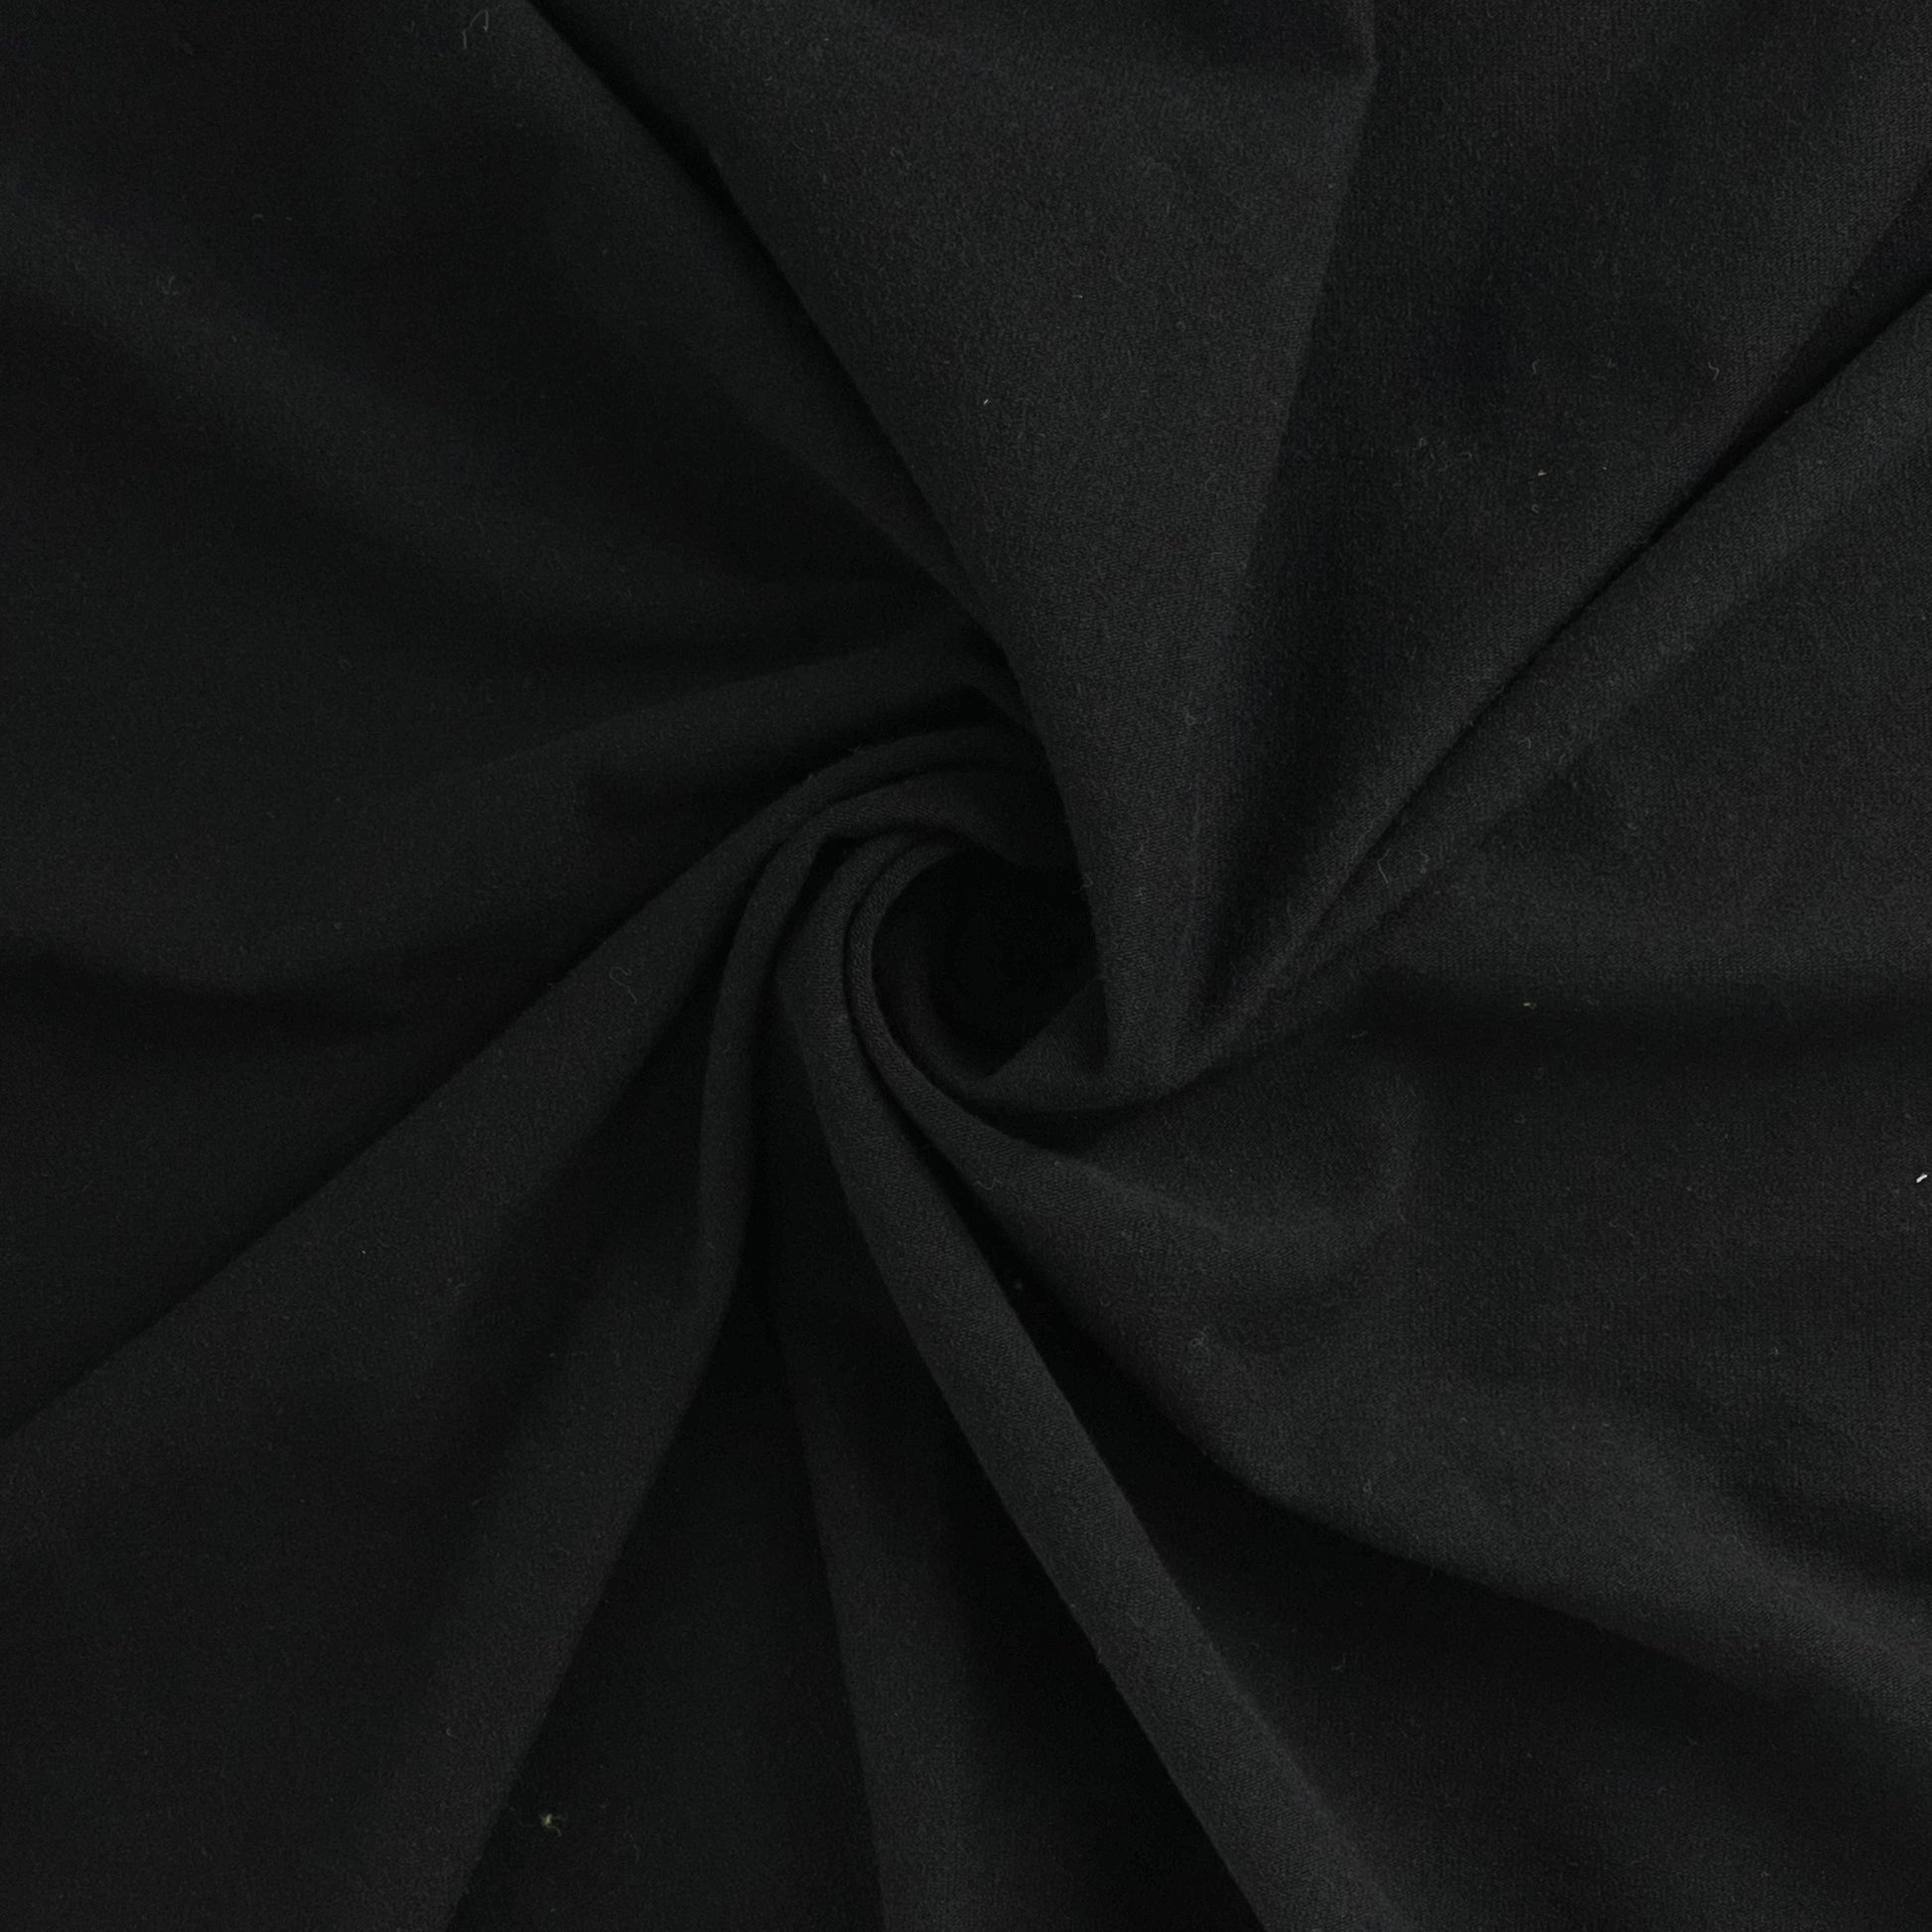 Washed Black 100% Cotton Jersey Knit Fabric by the Yard 260 GSM 14 Oz  66width 